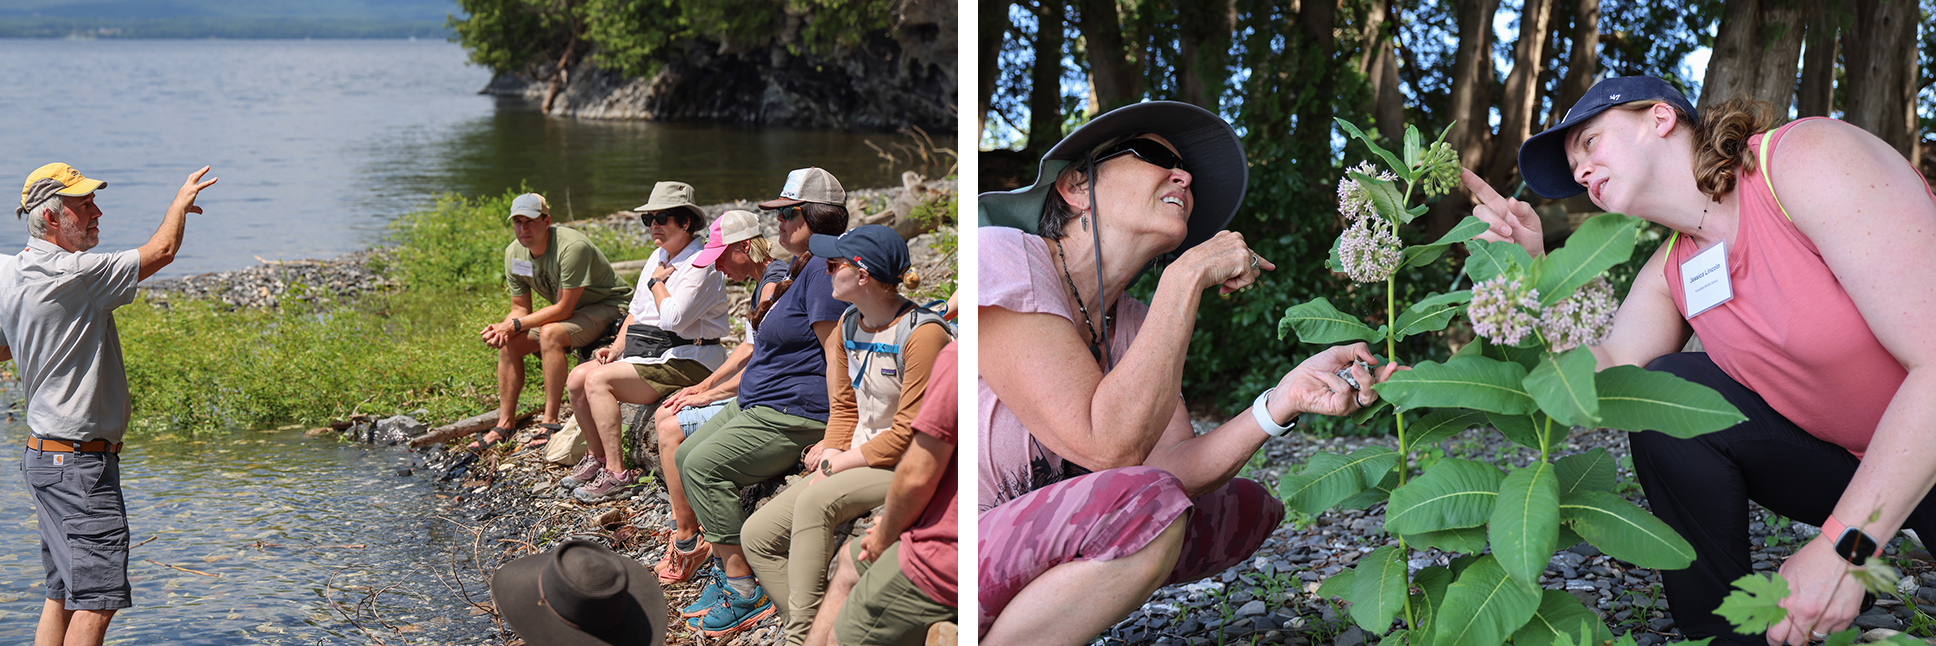 A collage of two images: A man stands in ankle-deep water in a lake talking to a group of adults seated on a rocky shoreline, and two women kneel to inspect a milkweed plant